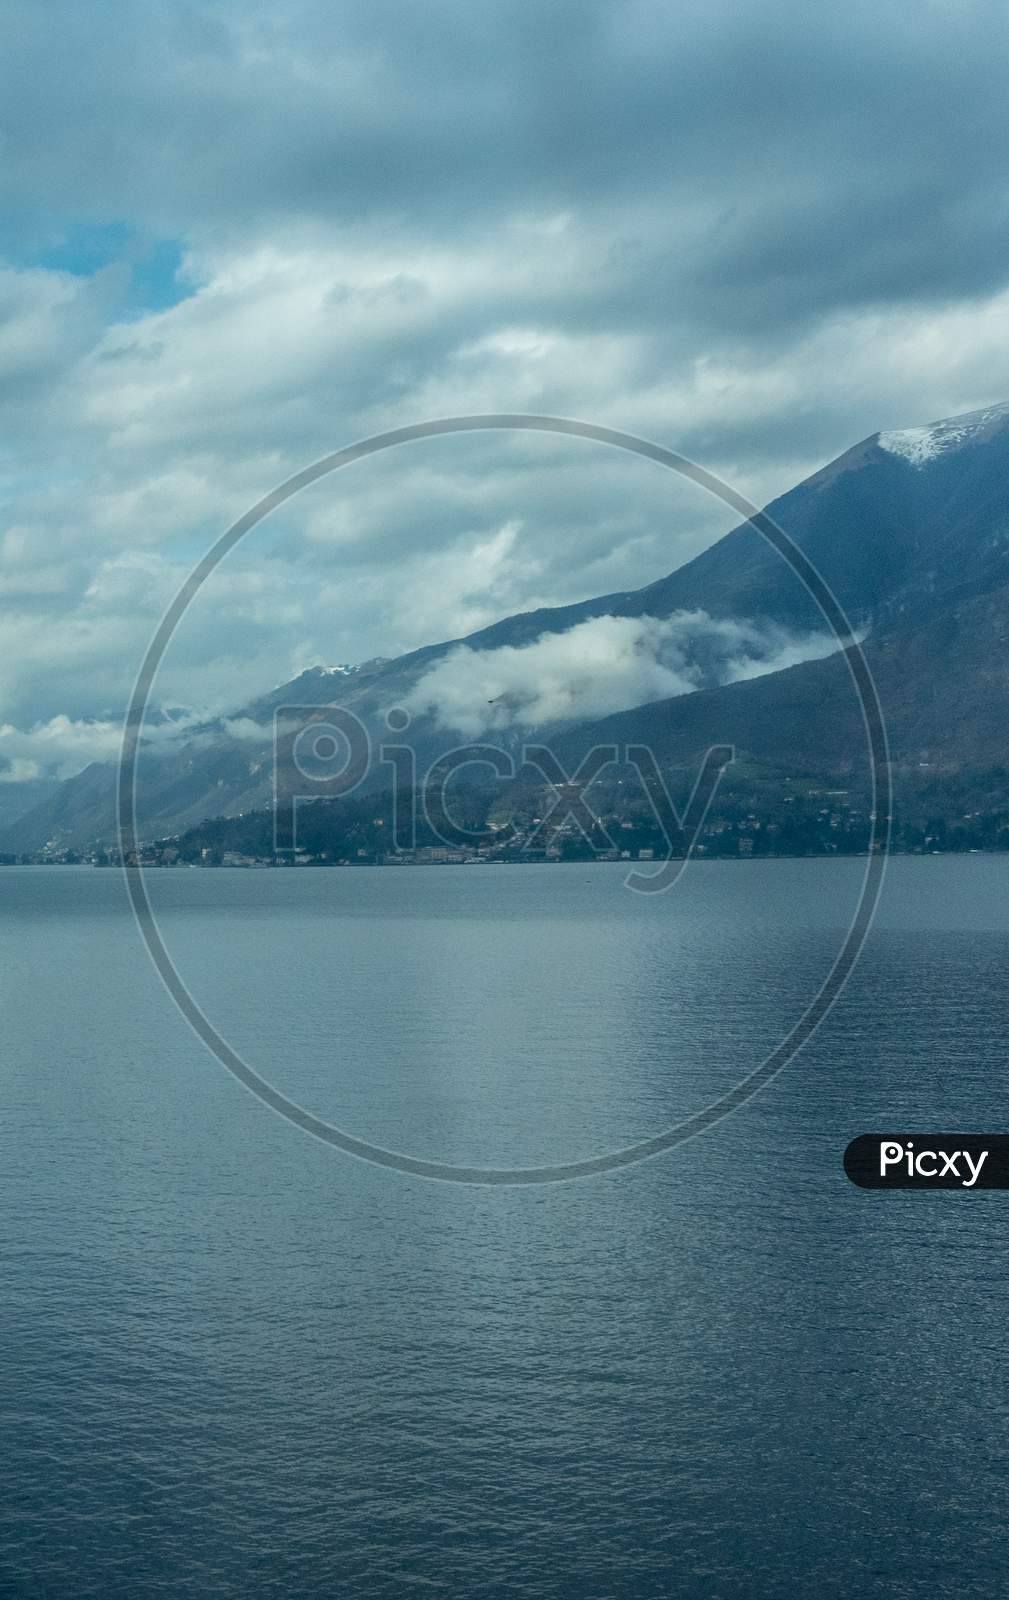 Italy, Varenna, Lake Como, A Large Body Of Water With A Mountain In The Background